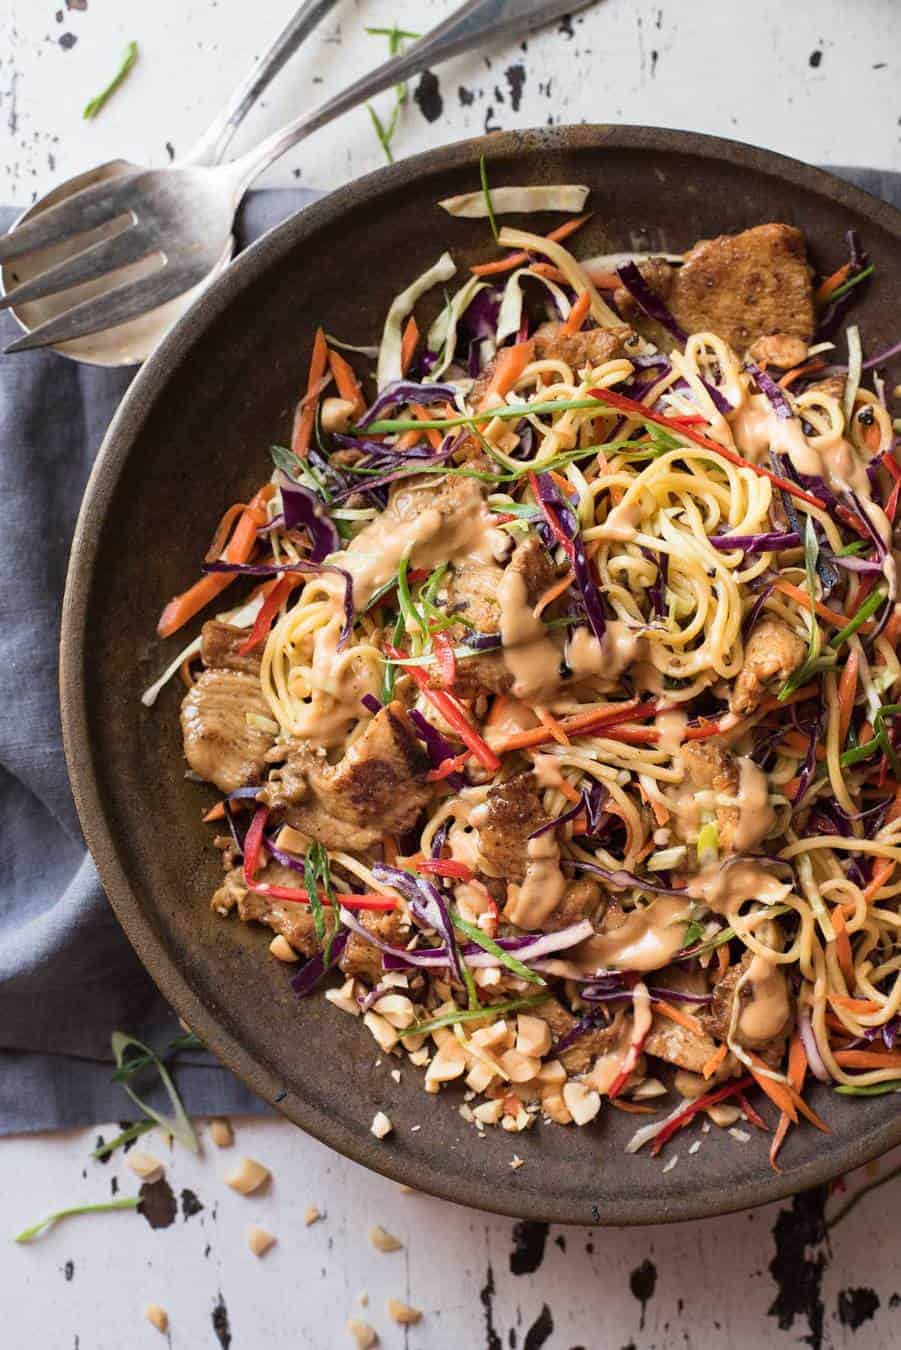 Satay Chicken Noodle Salad drizzled with peanut dressing in a dark brown bowl, ready to be served.